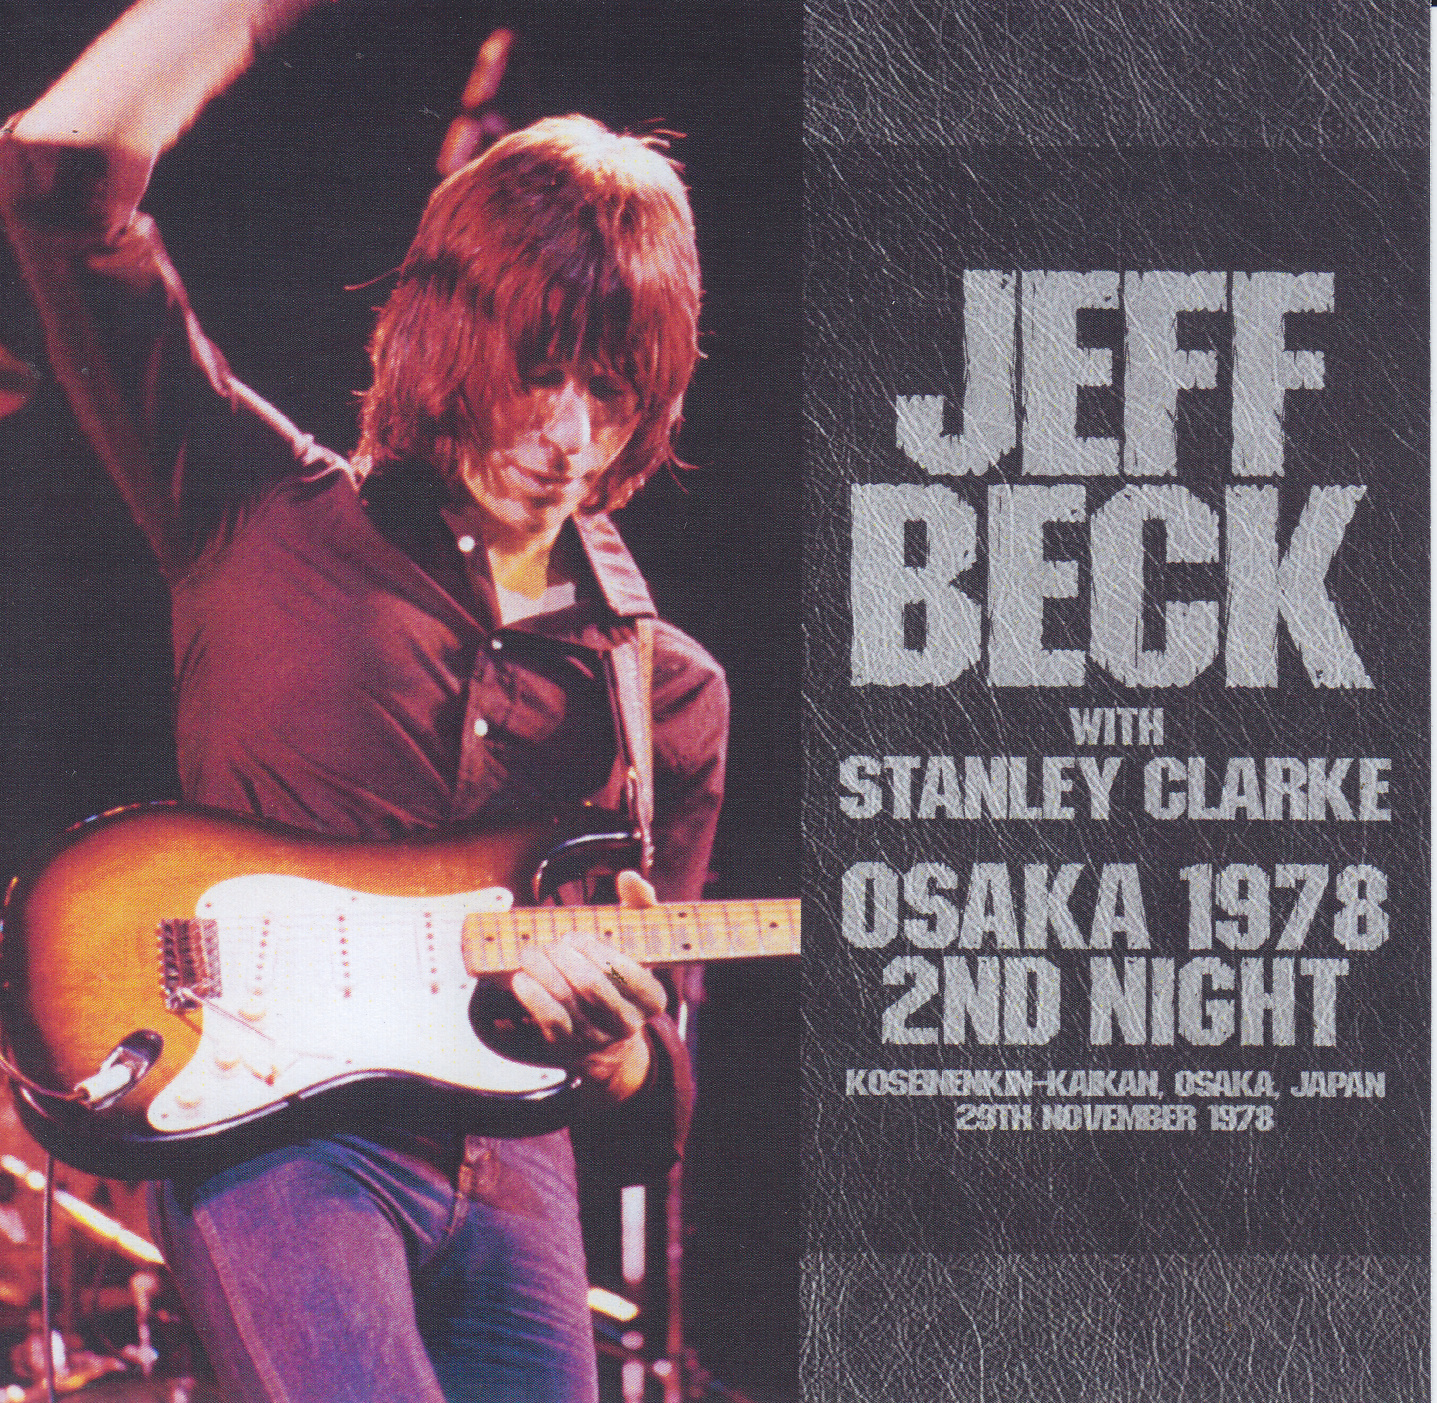 Jeff Beck With Stanley Clarke / Osaka 1978 2nd Night / 2CDR 